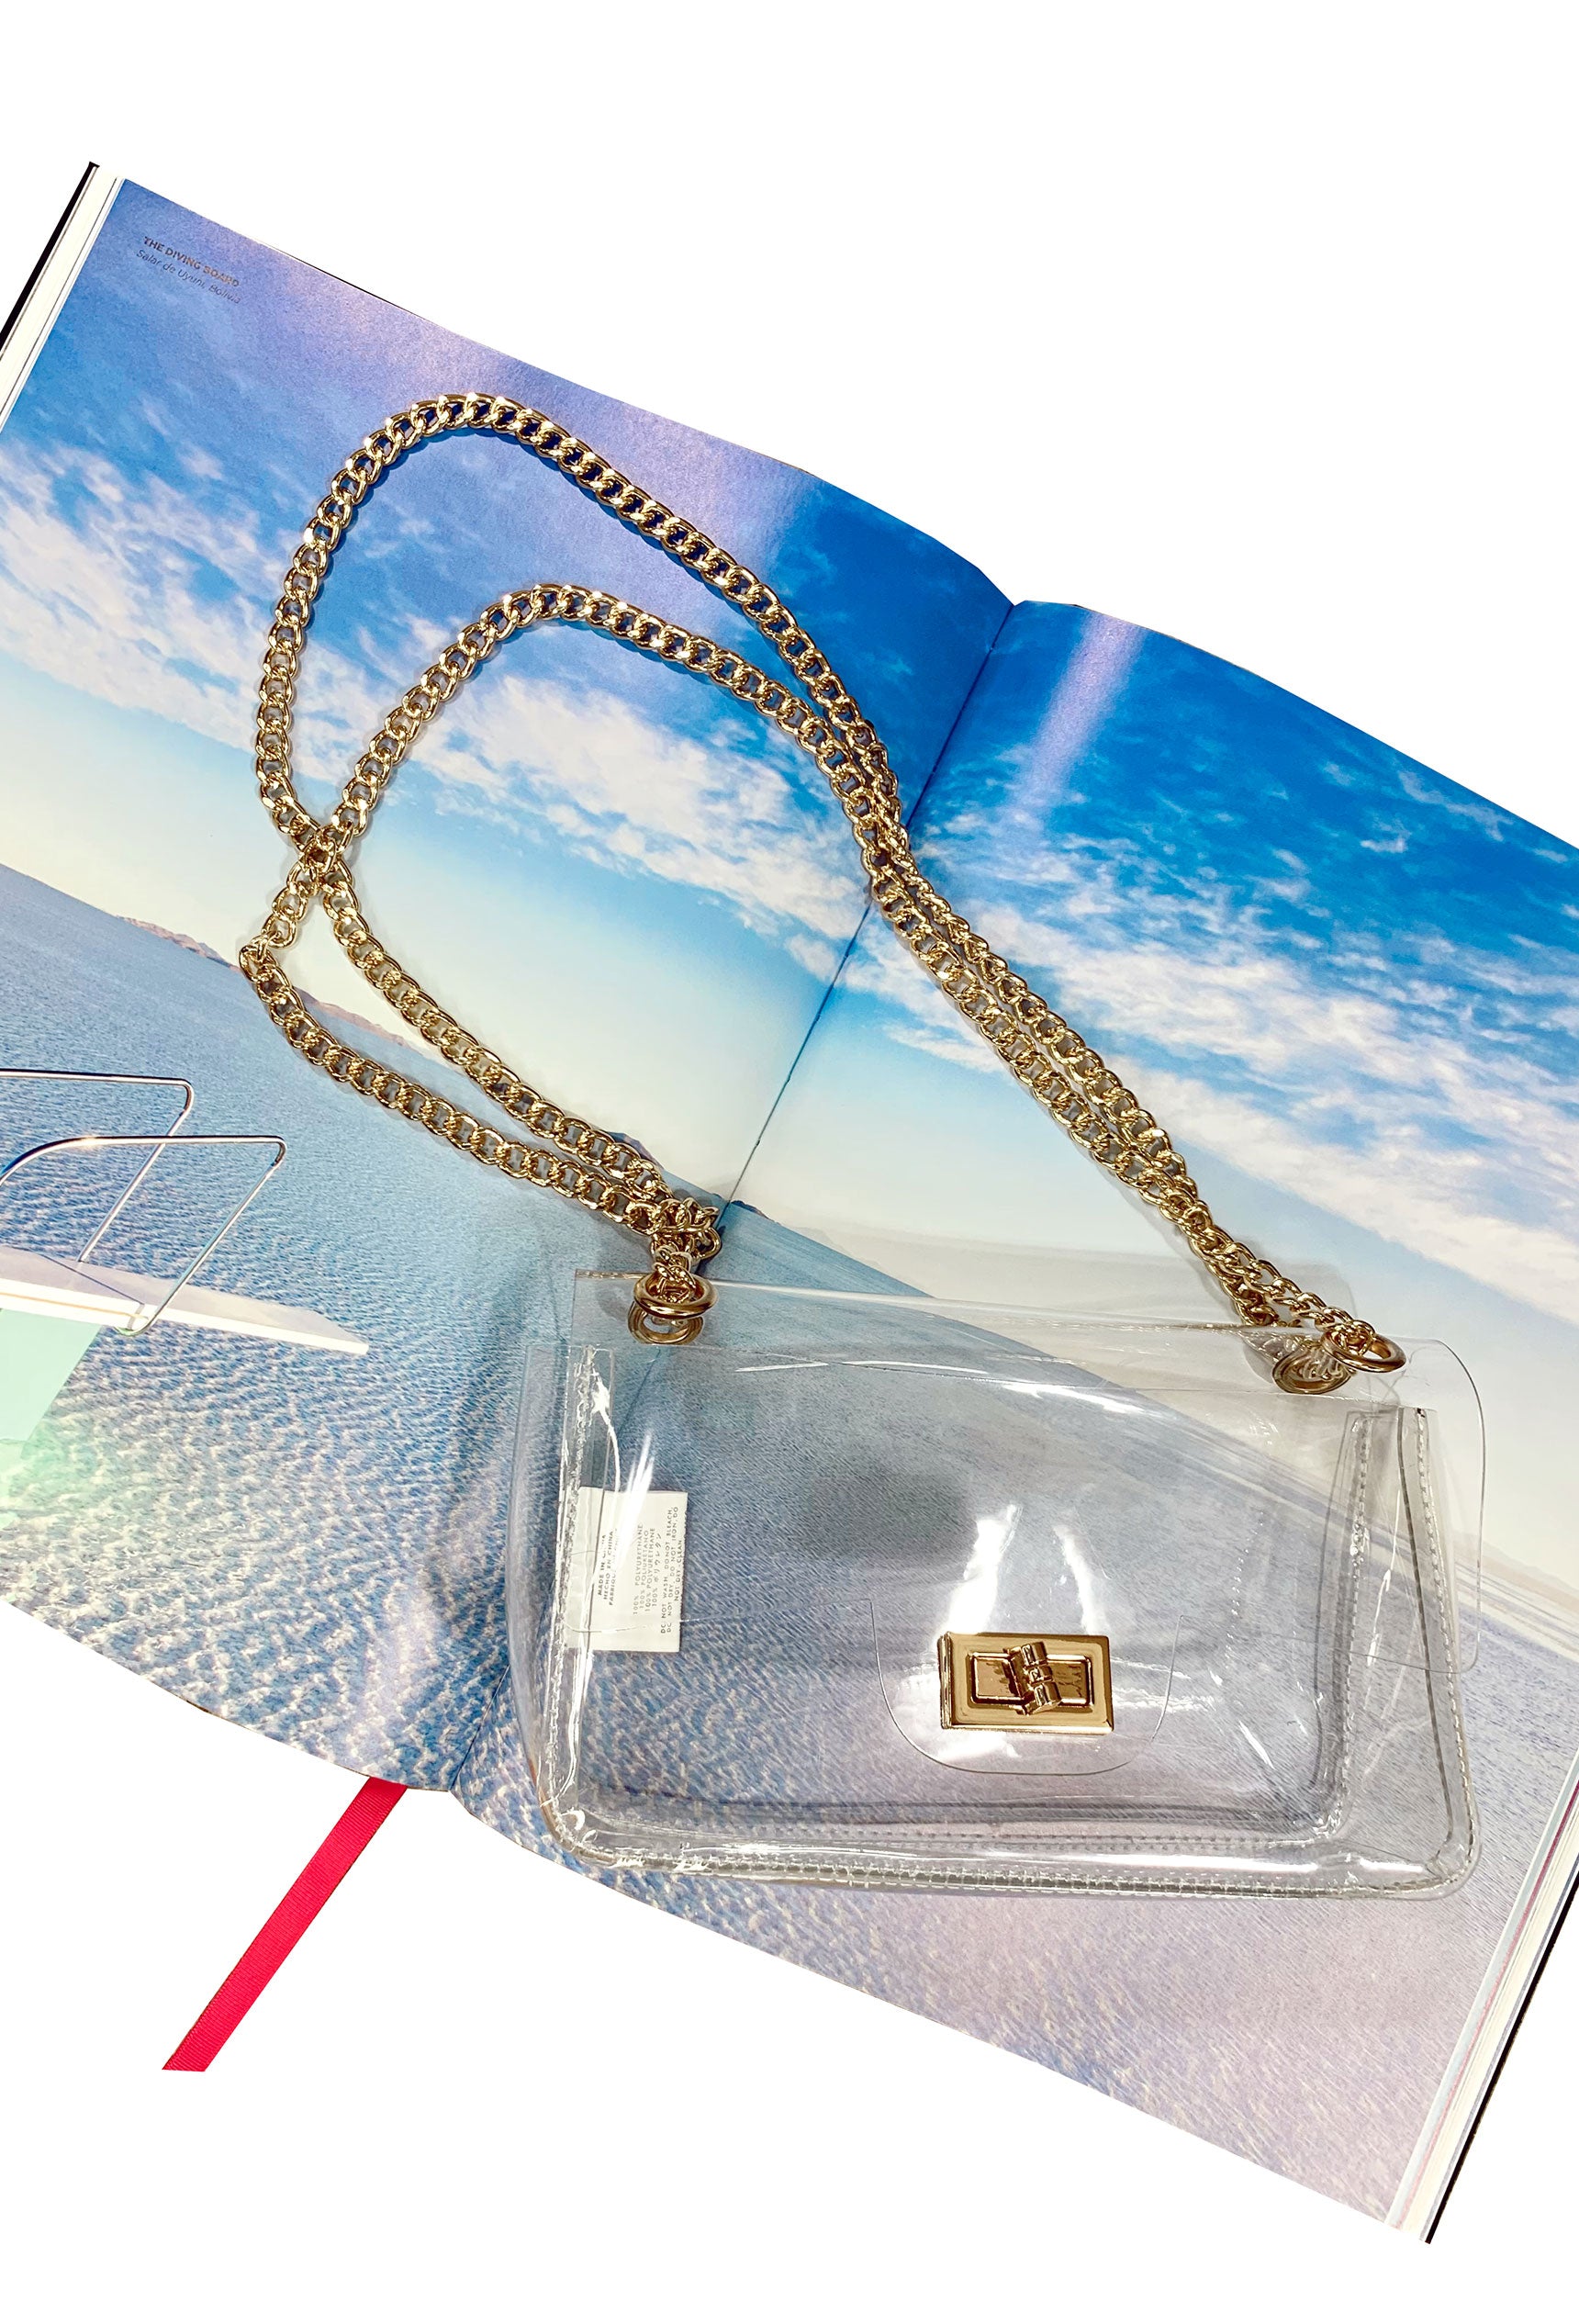 Madelyn Clear Crossbody in Gold, clear cross body purse with double gold chain and gold clasp